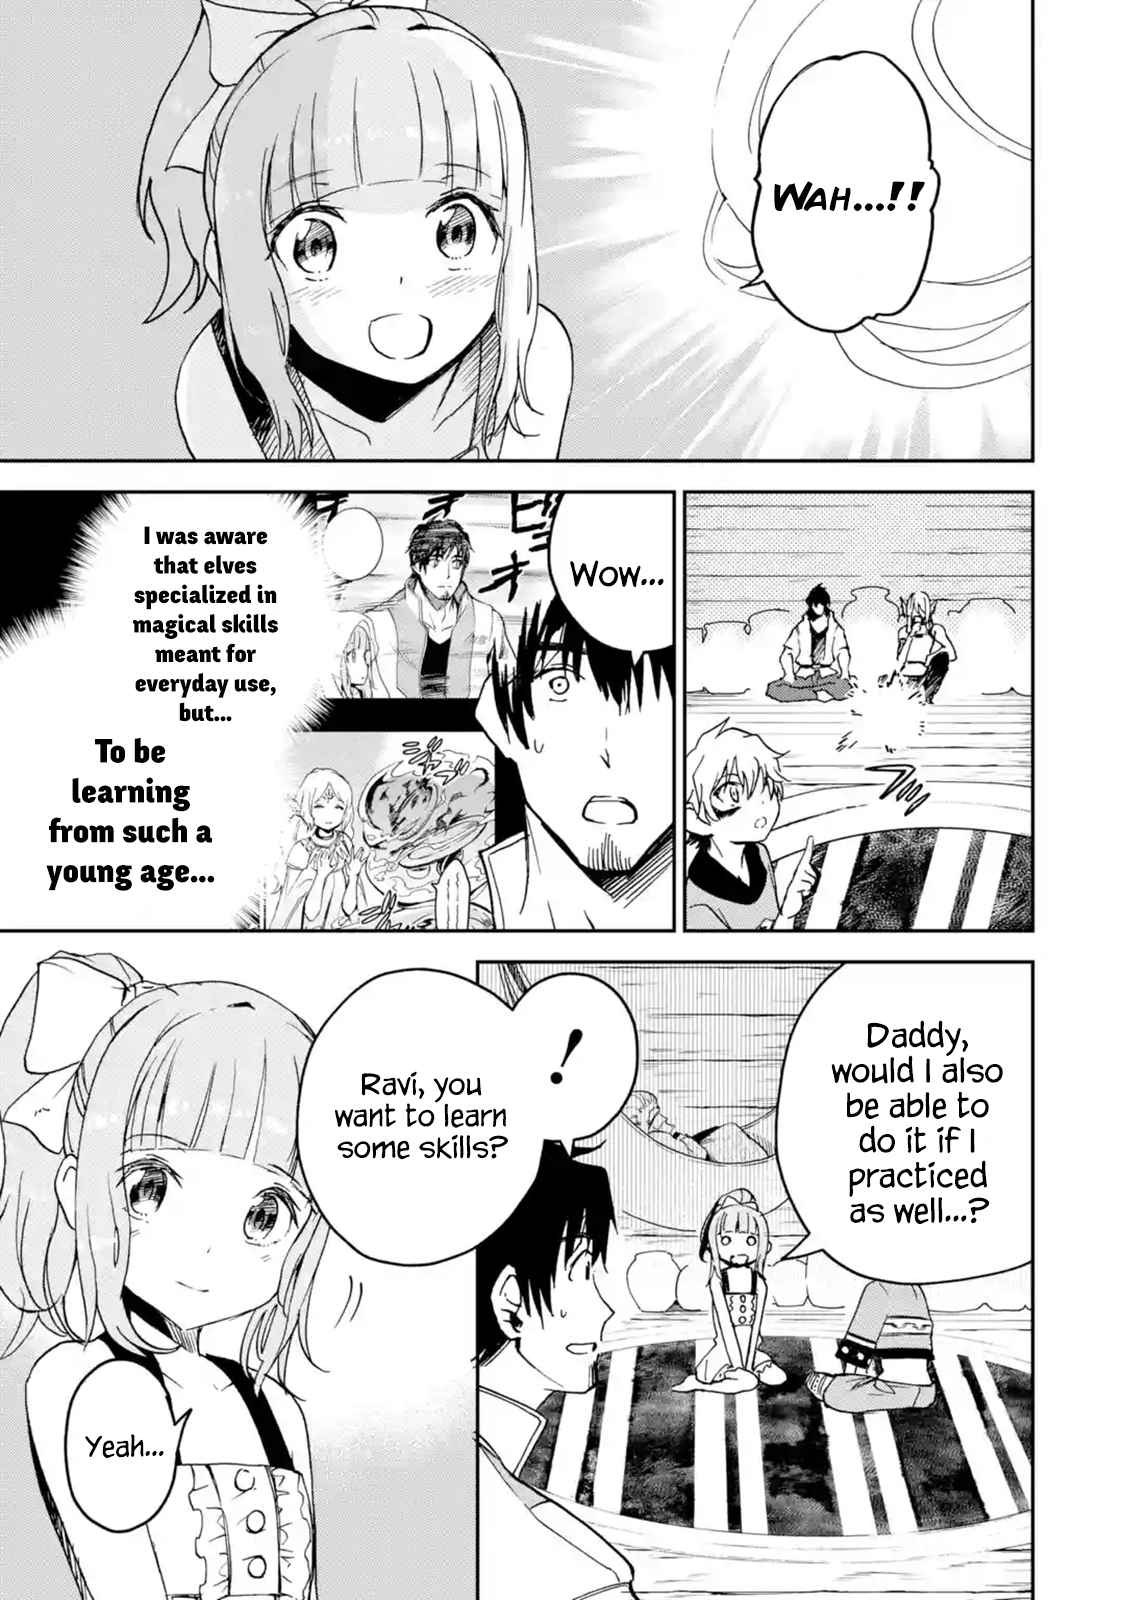 I'm a Middle Aged Man Who Got My Adventurer License Revoked, But I'm Enjoying a Carefree Lifestyle Because I Have an Adorable Daughter Now Vol. 2 Ch. 6